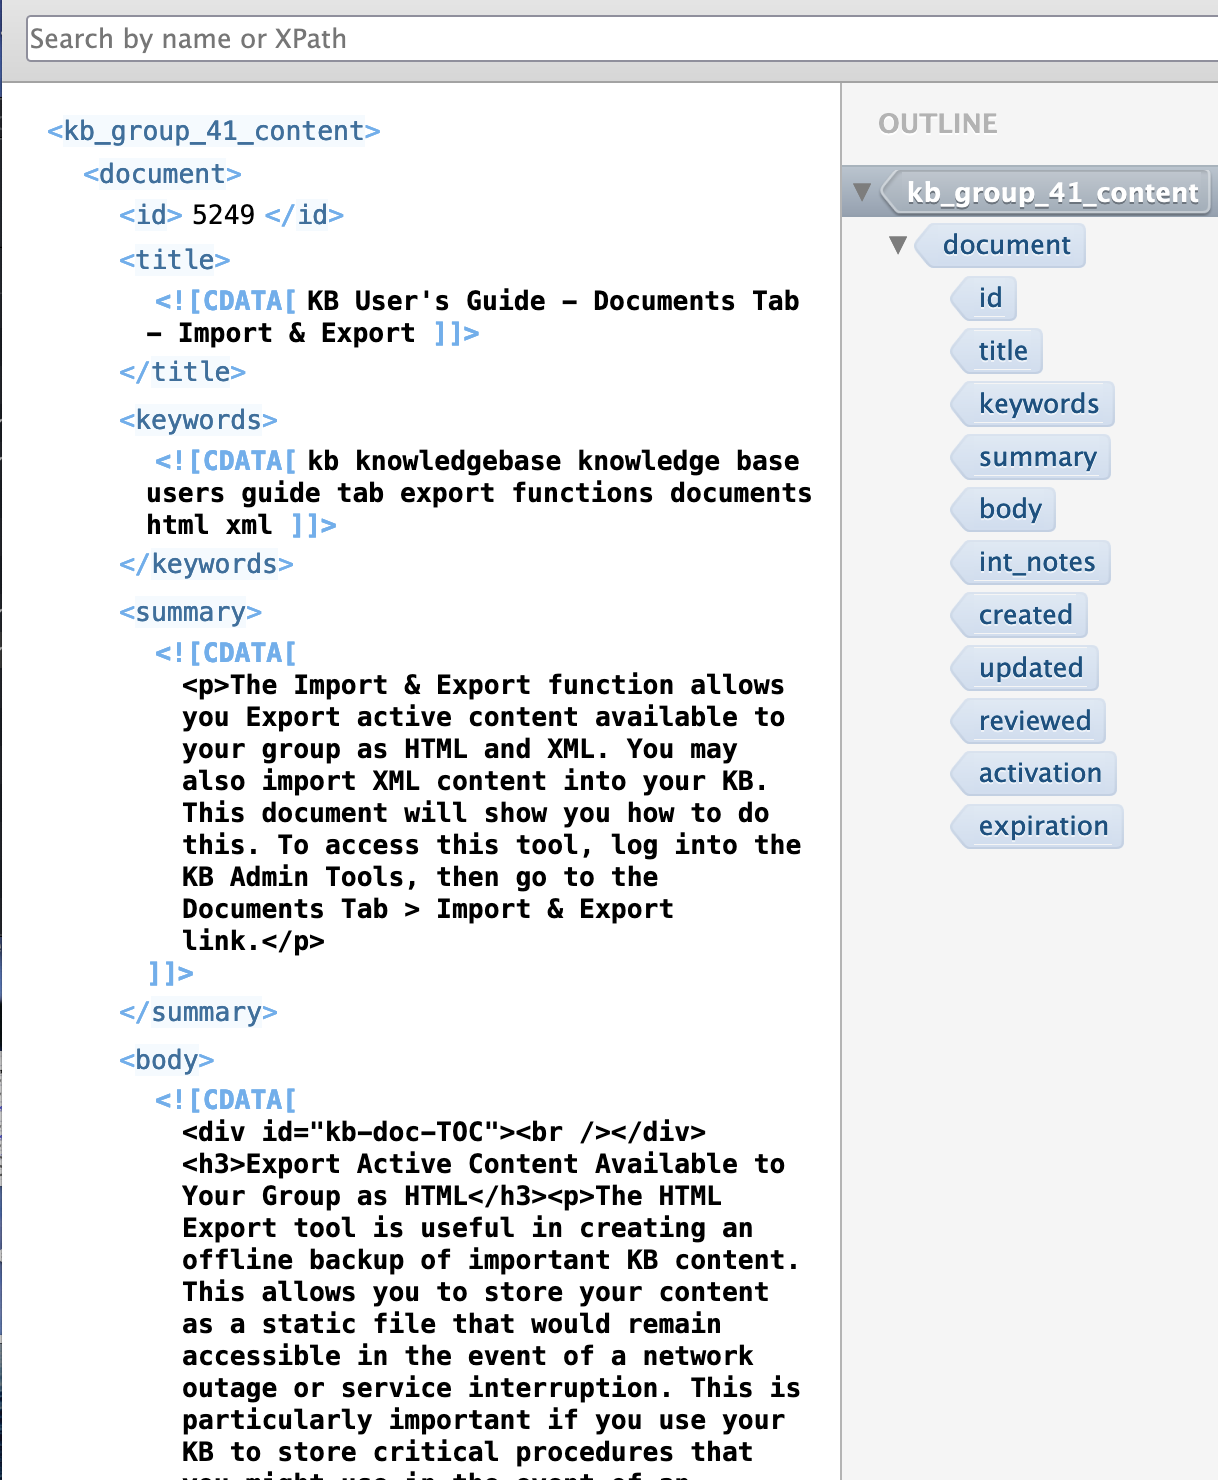 Example of an exported XML file, where the fields have been expanded and the HTML content contained within them can be read.